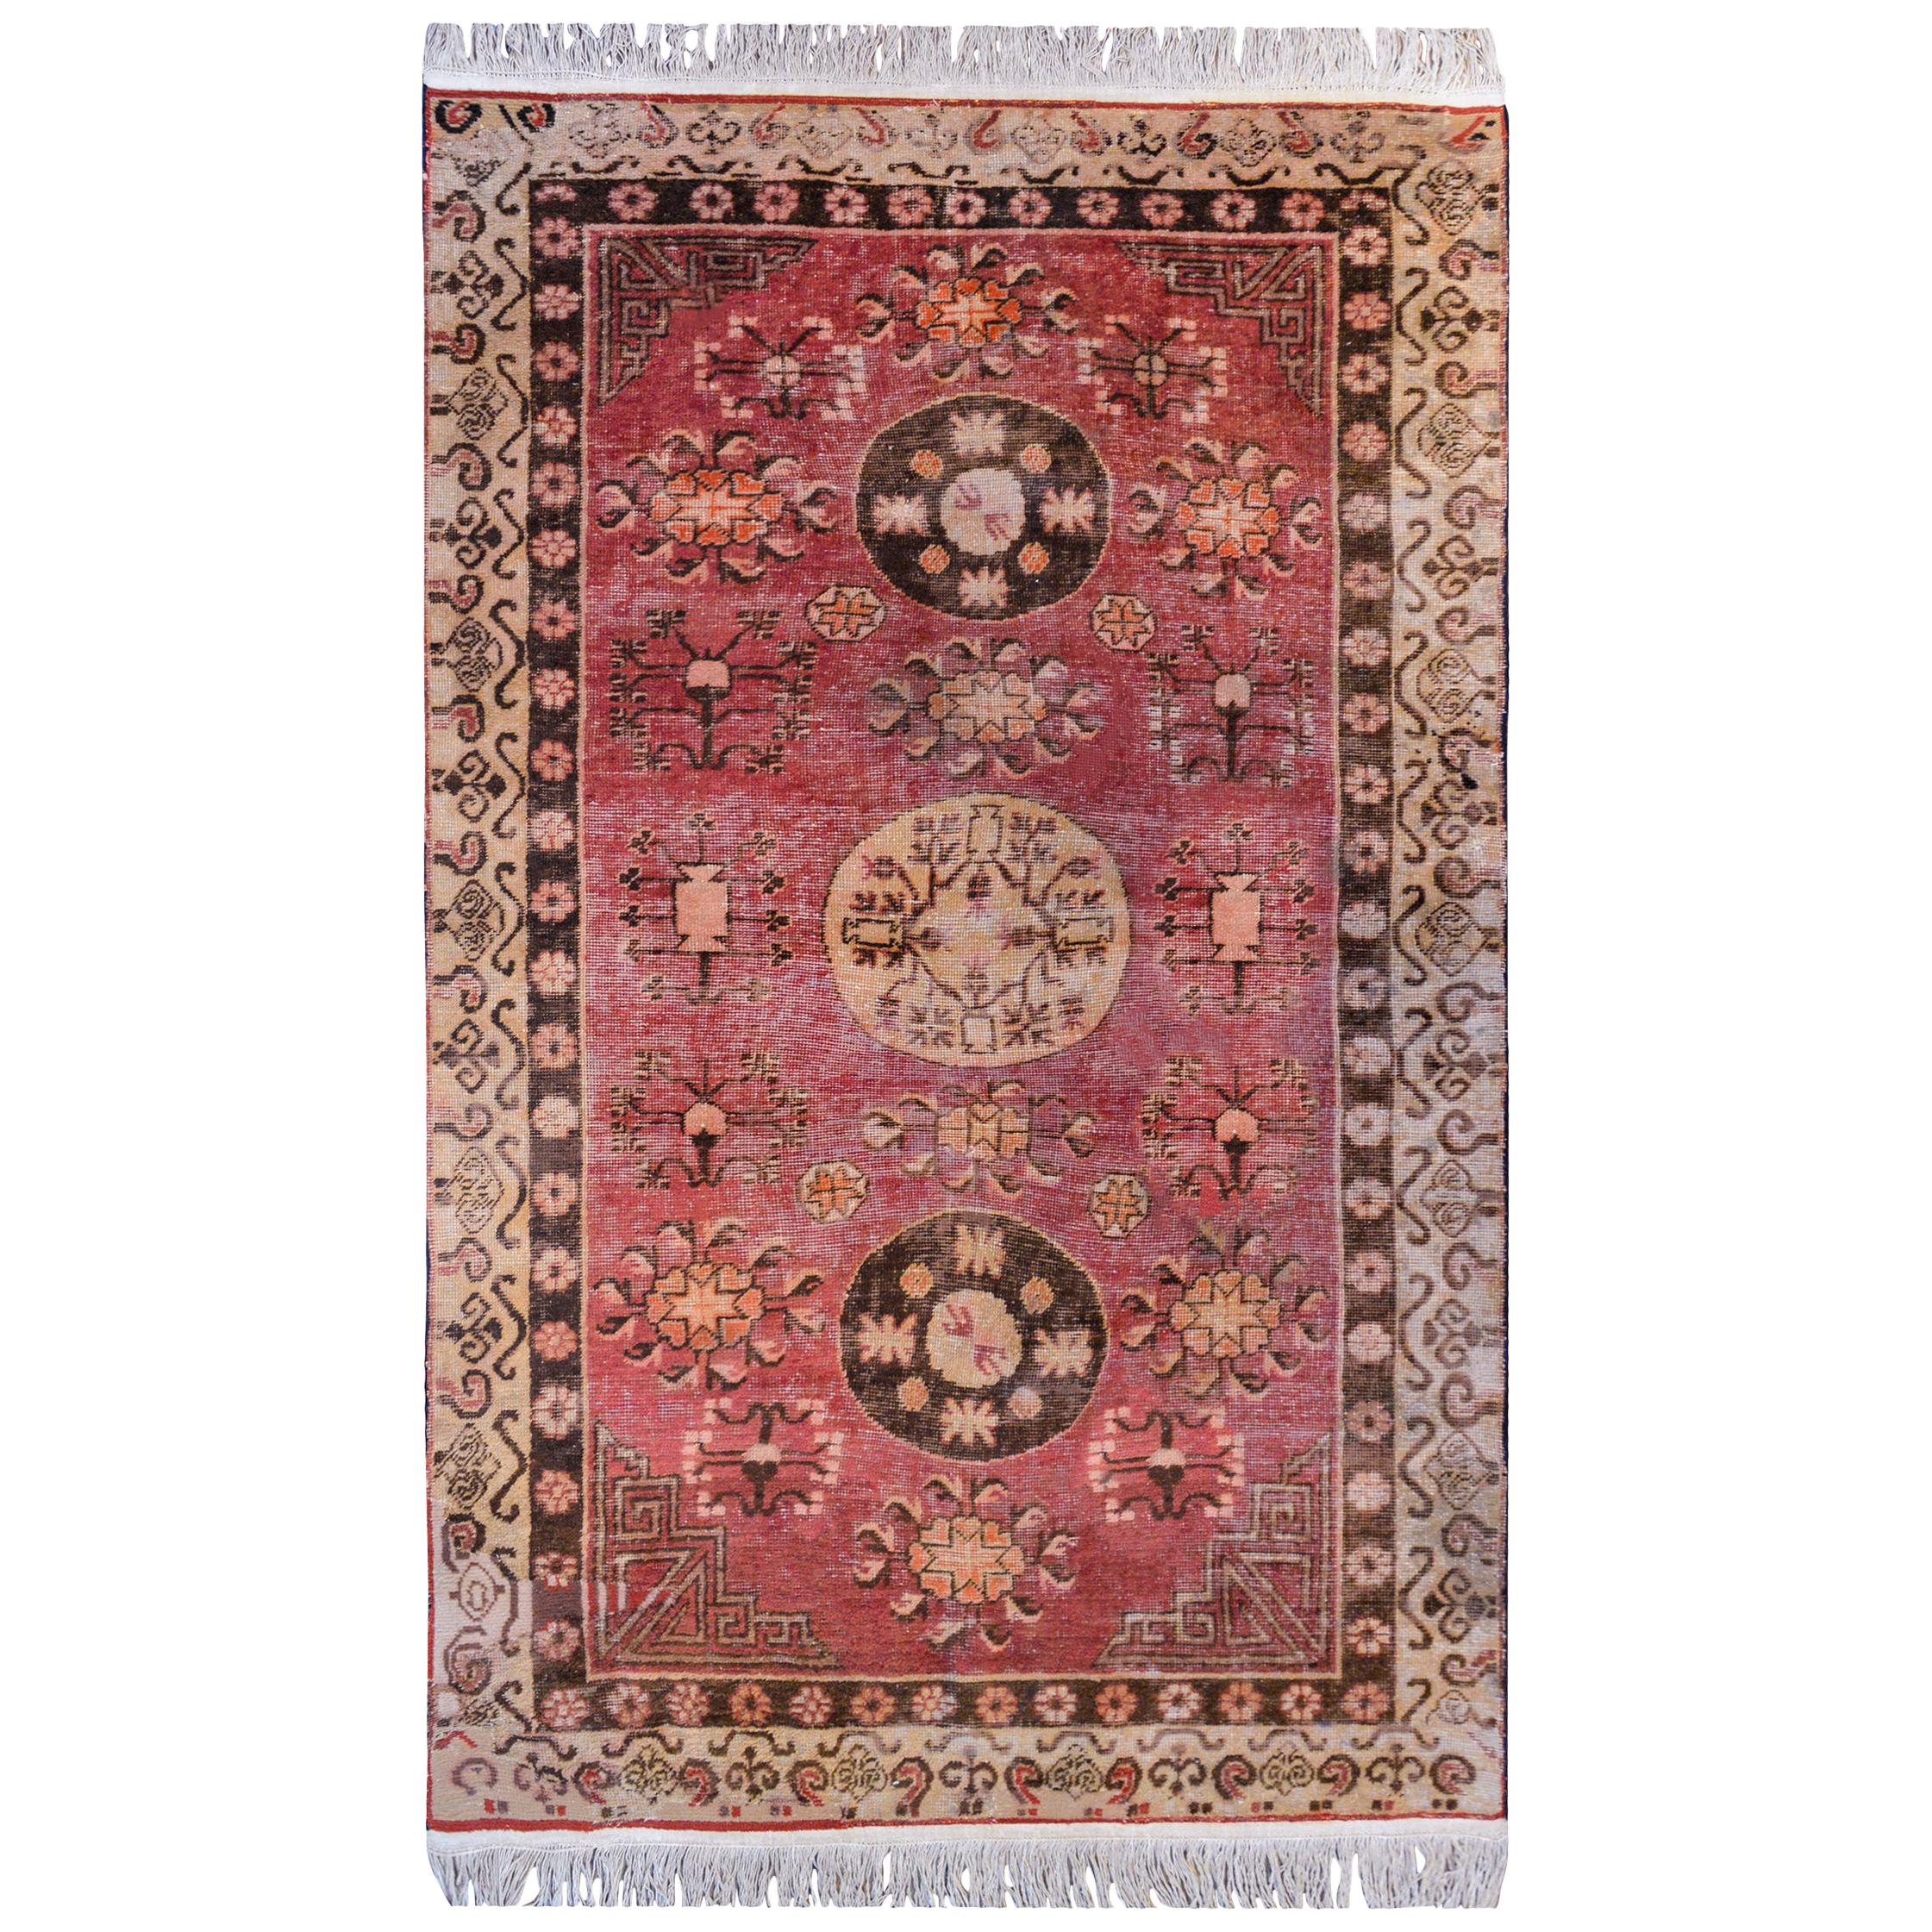 Beautiful Early 20th Century Khotan Rug For Sale